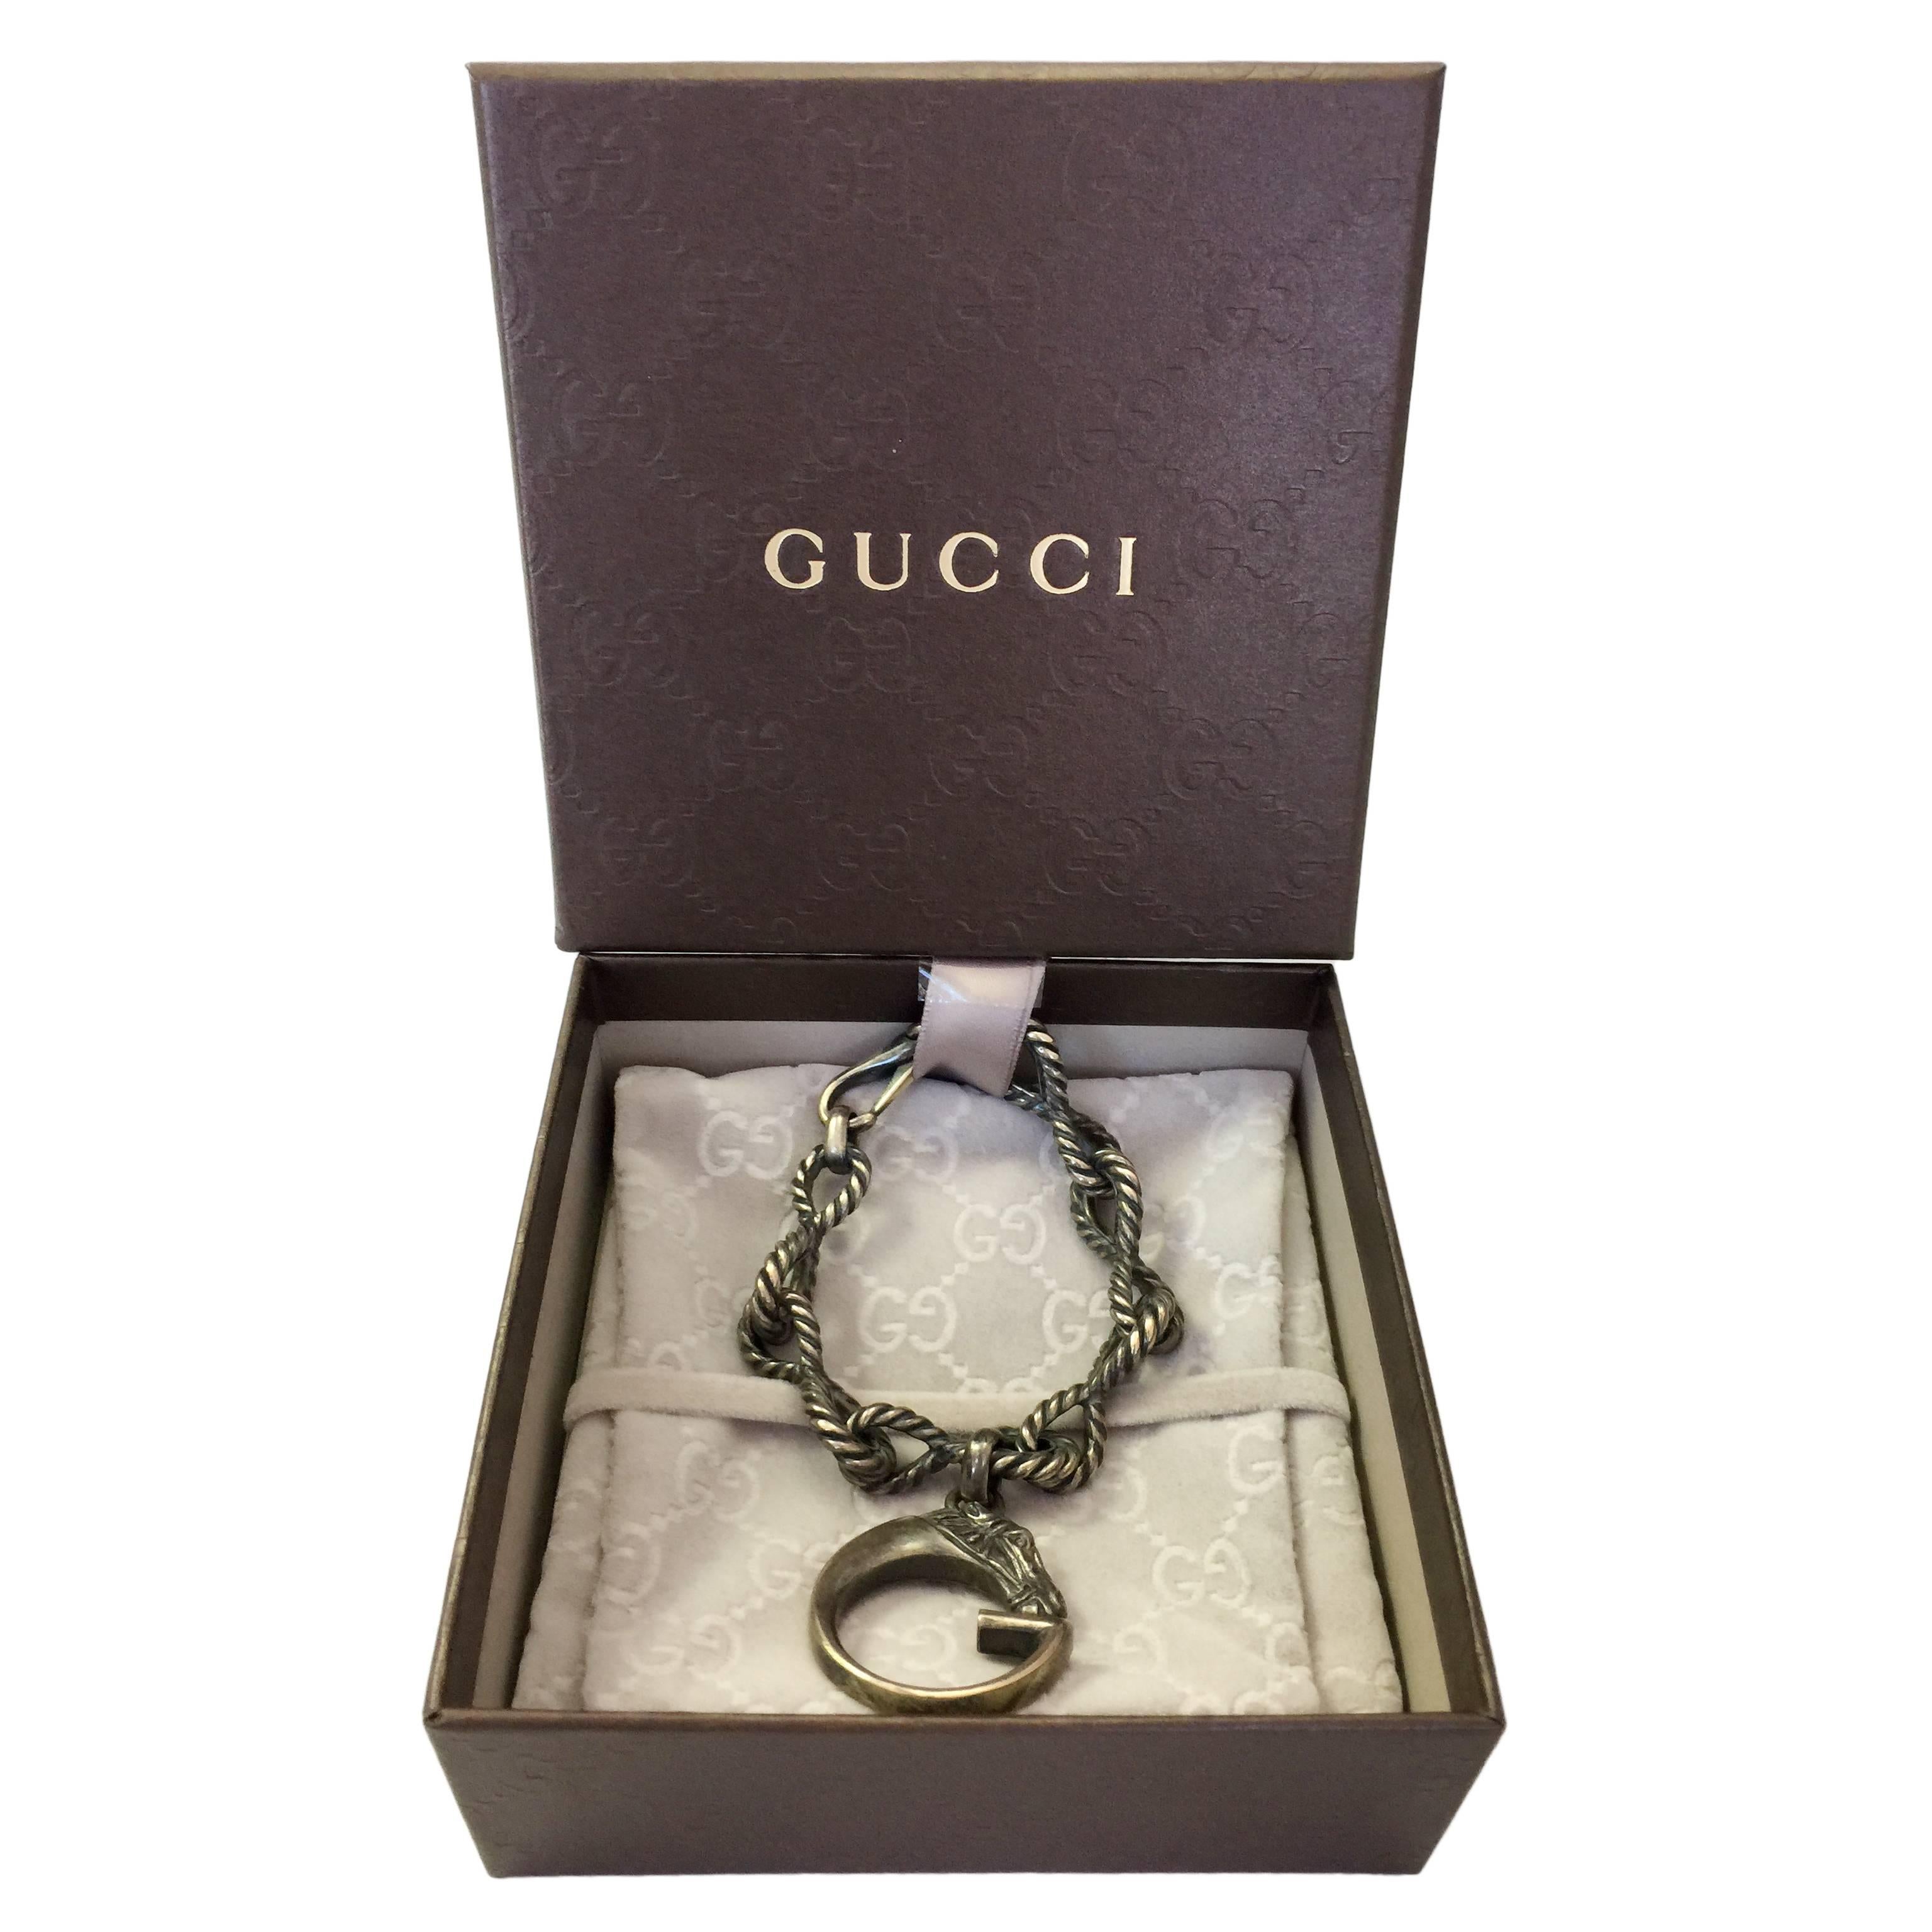 Gucci Sterling Silver Rope Chain Bracelet with "G" Horse Charm 